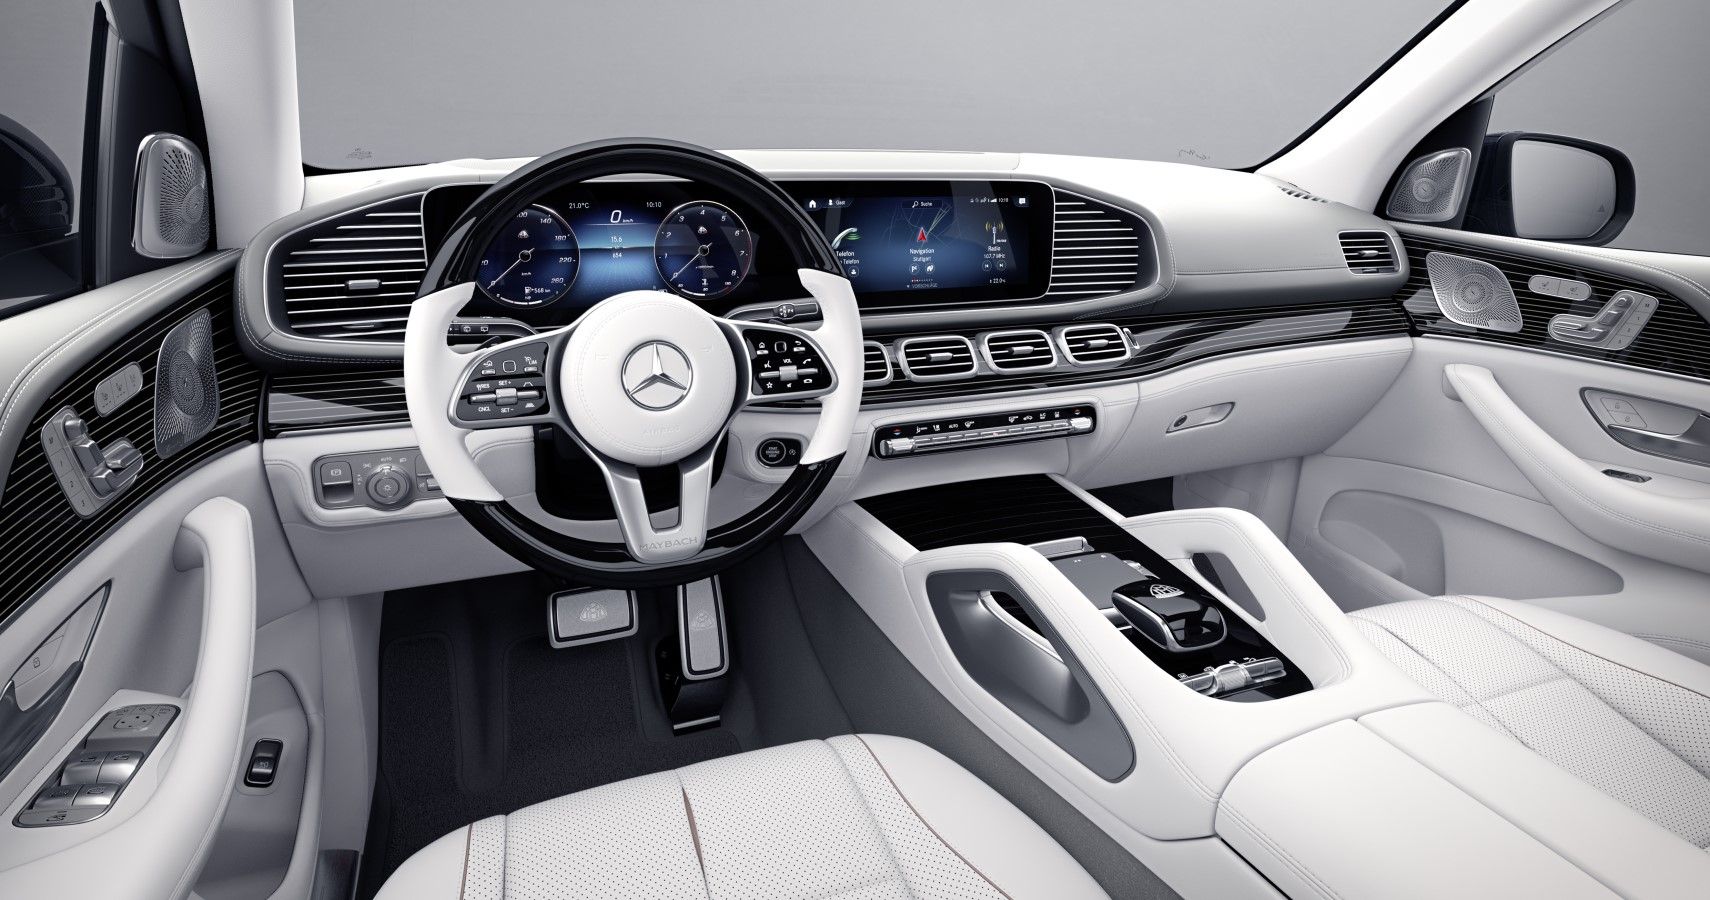 2022 Mercedes-Maybach GLS Edition 100 dashboard and upholstery